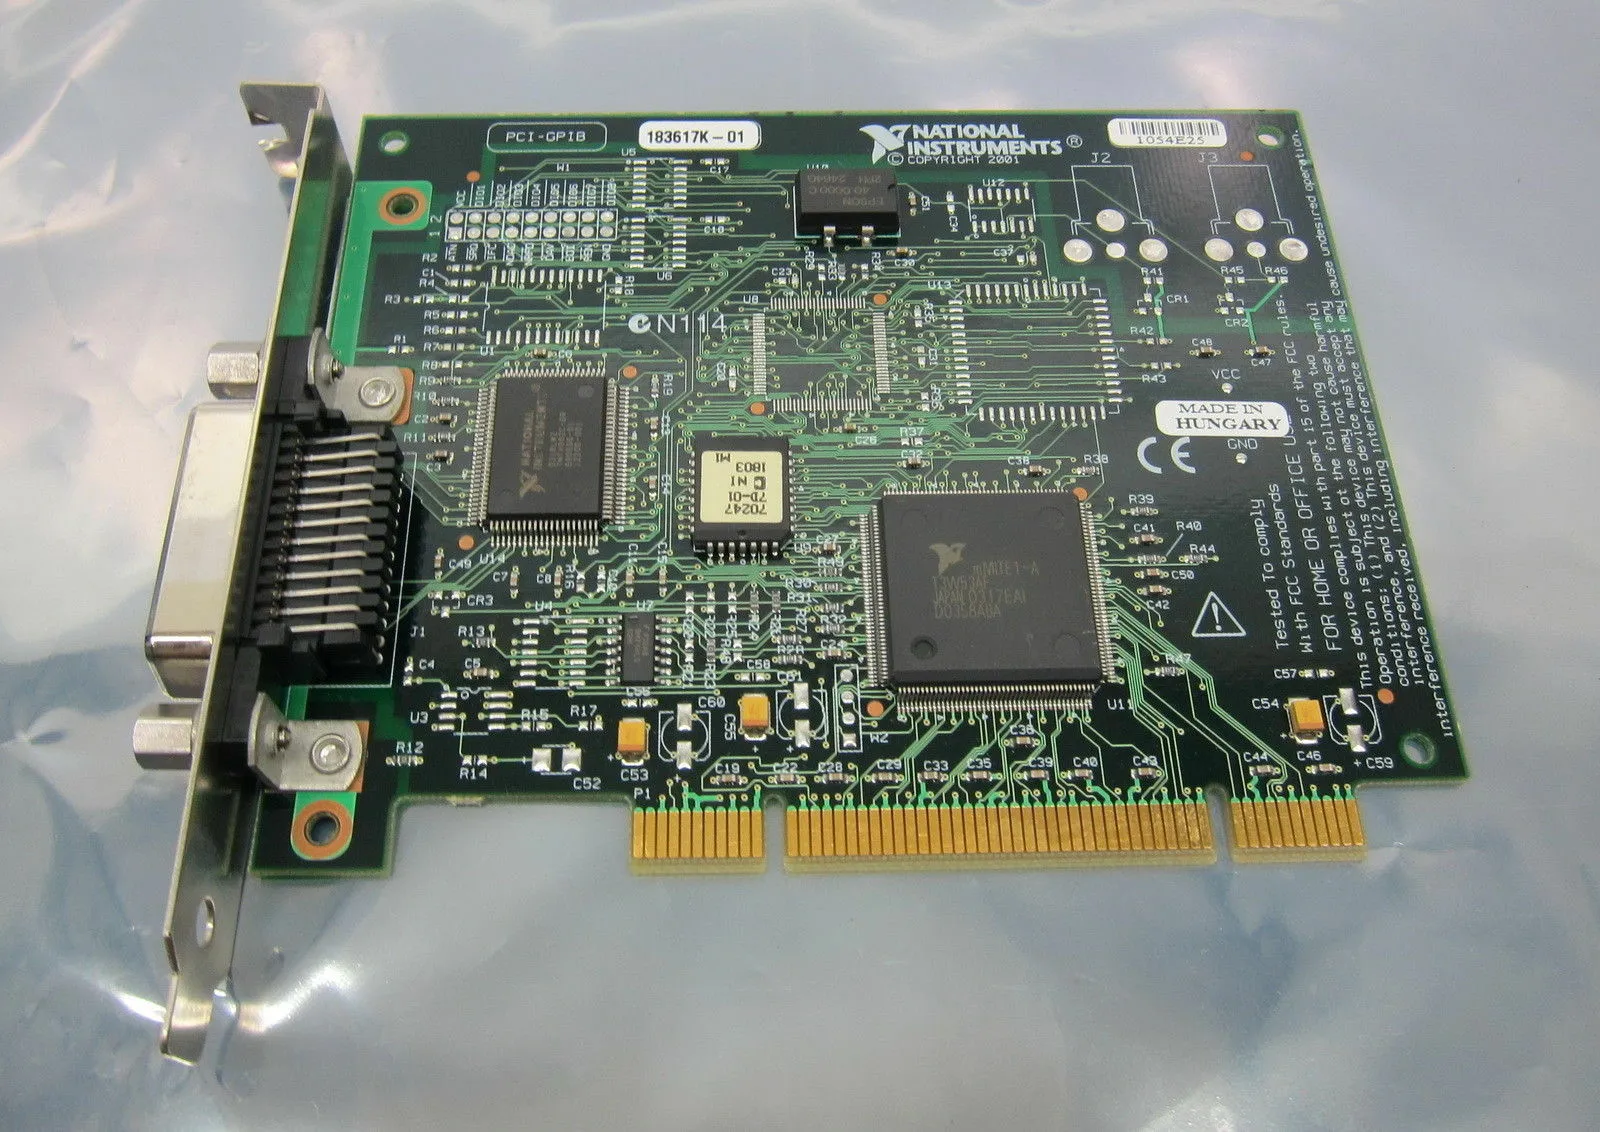 PCI-GPIB 183617K-01 GPIB IEEE 488.2 Interface Adapter Kcal 97 98 Edition For National Instruments NI Original